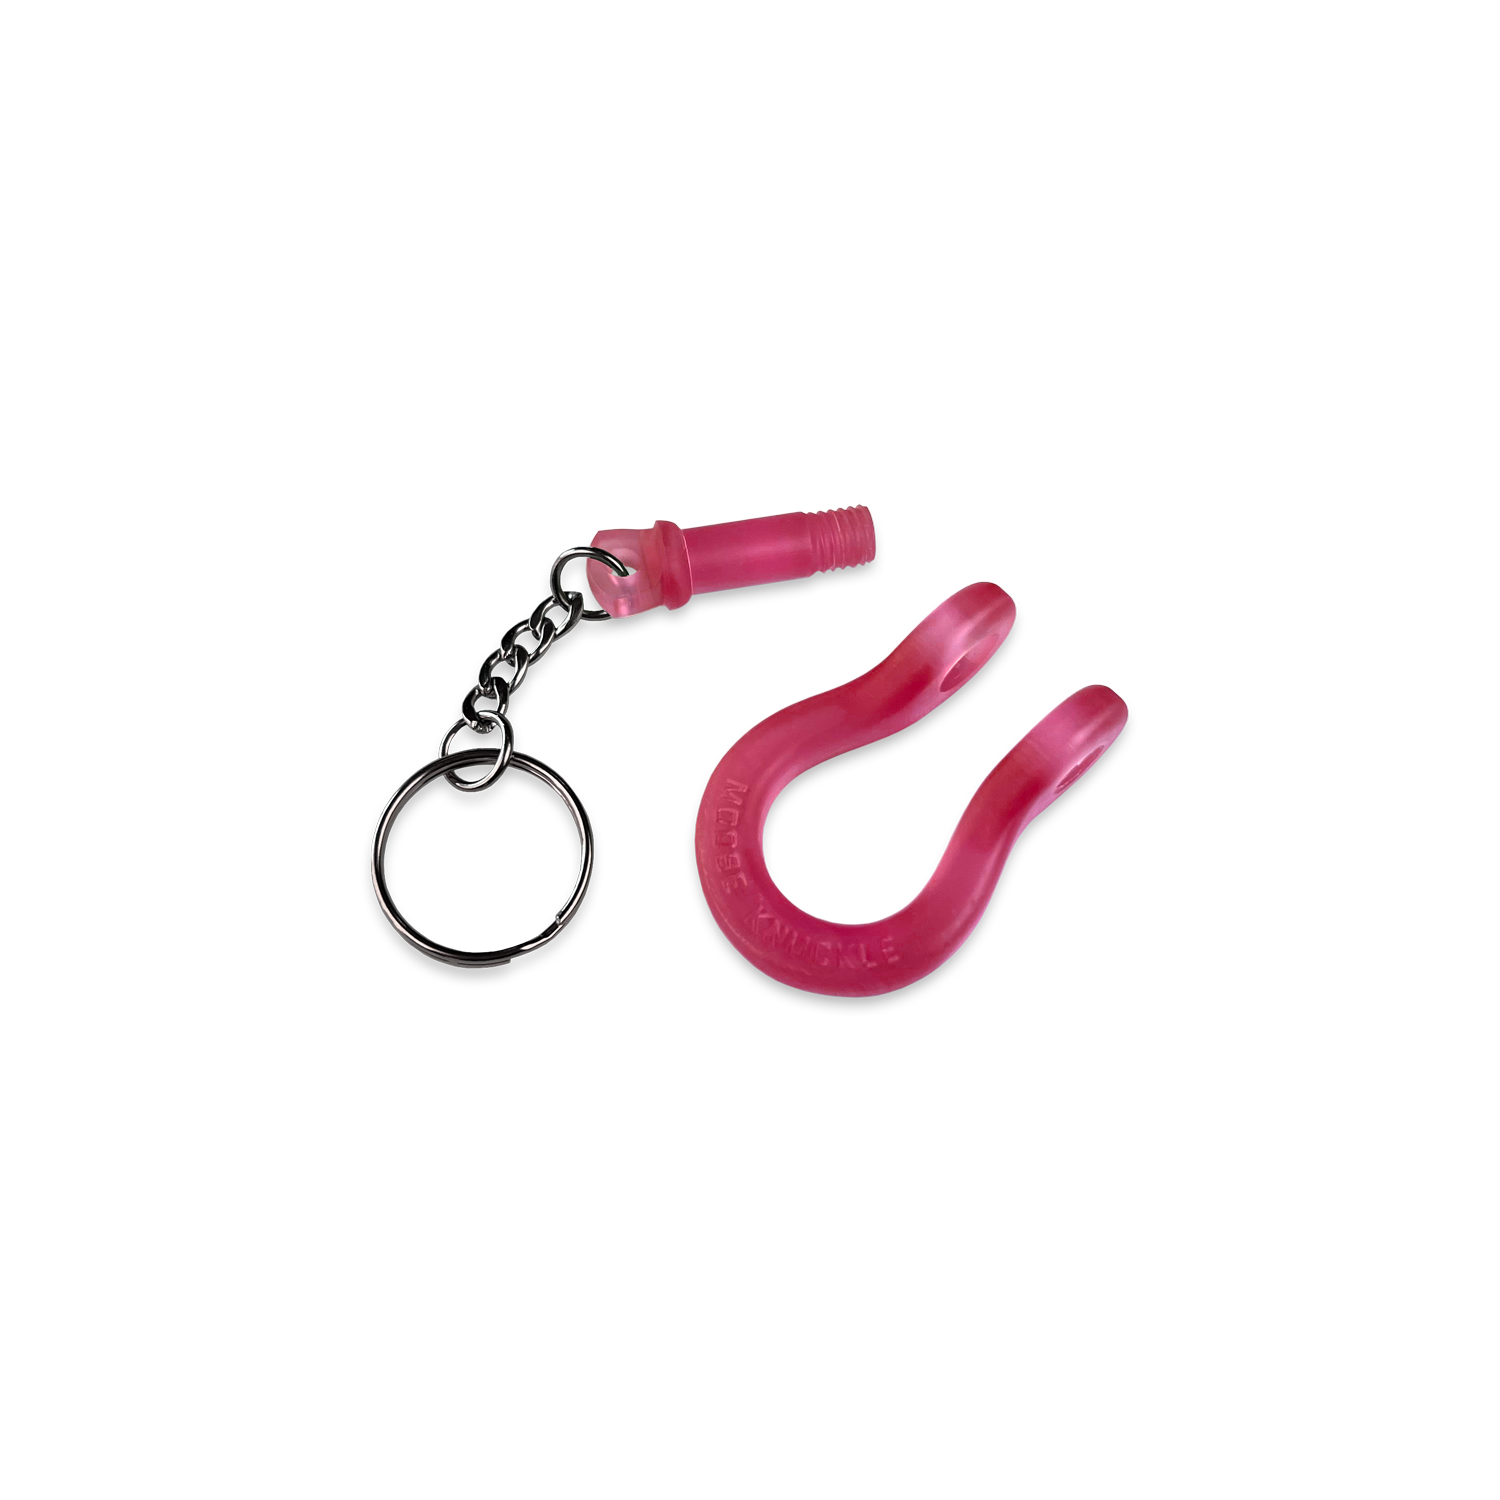 B'oh Shackle Screw Pin Key Chain in Red. Pin and Body